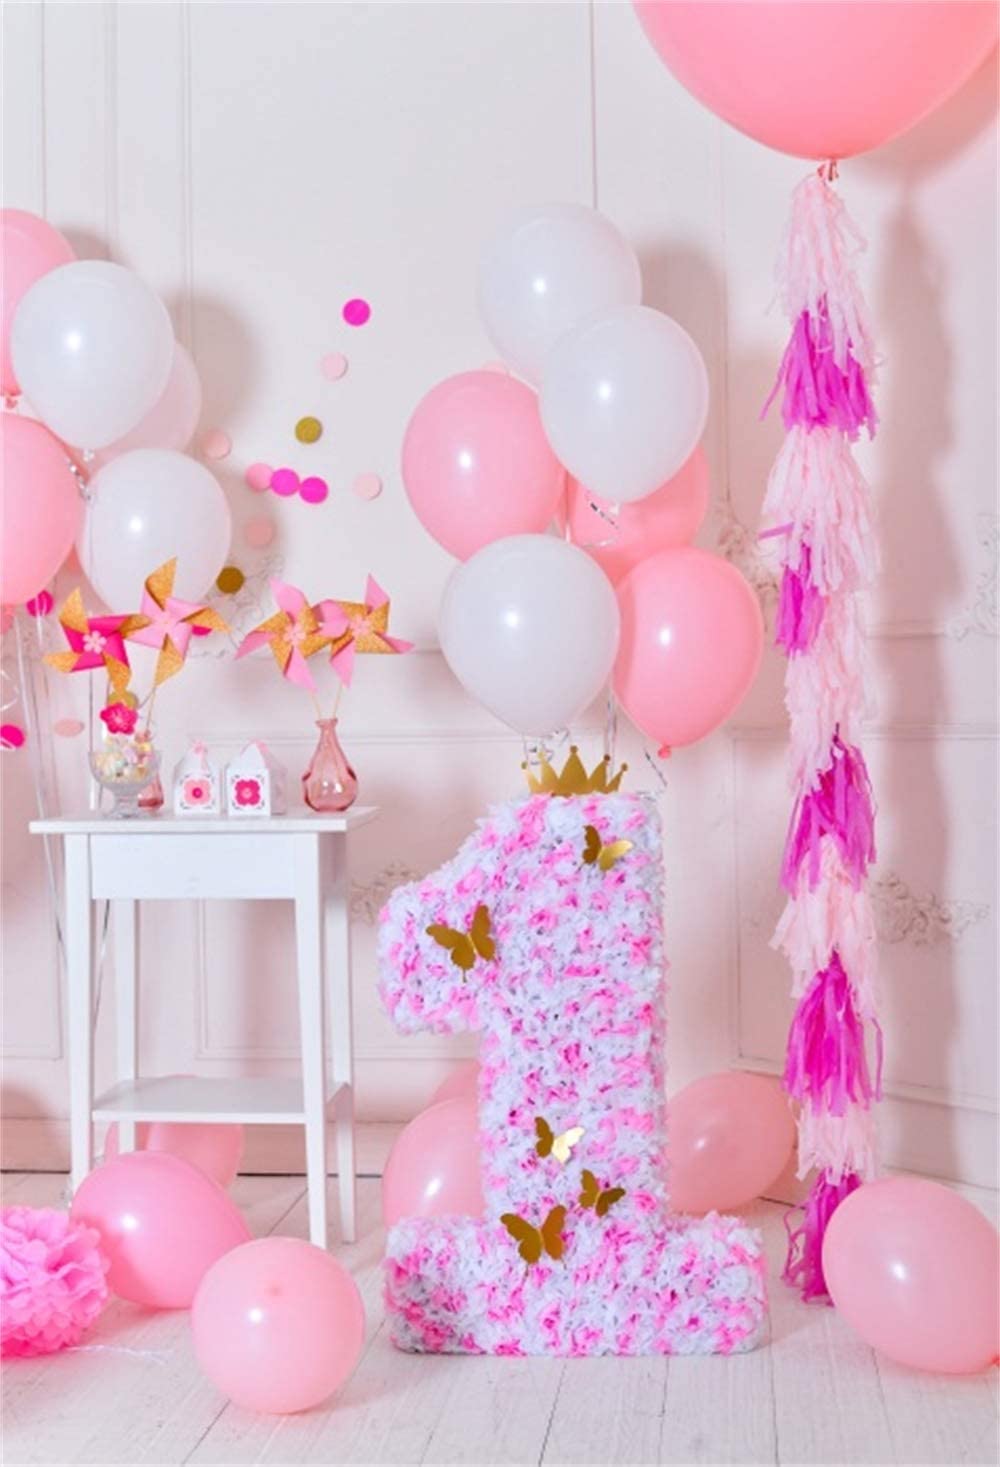 Amazon.com, LFEEY 3x5ft Happy First Birthday Party Background for Photo Baby Room Decor Wallpaper Girls Little Princess Cake Smash Photo Shoot Happy 1st Birthday Backdrop Photo Studio Props